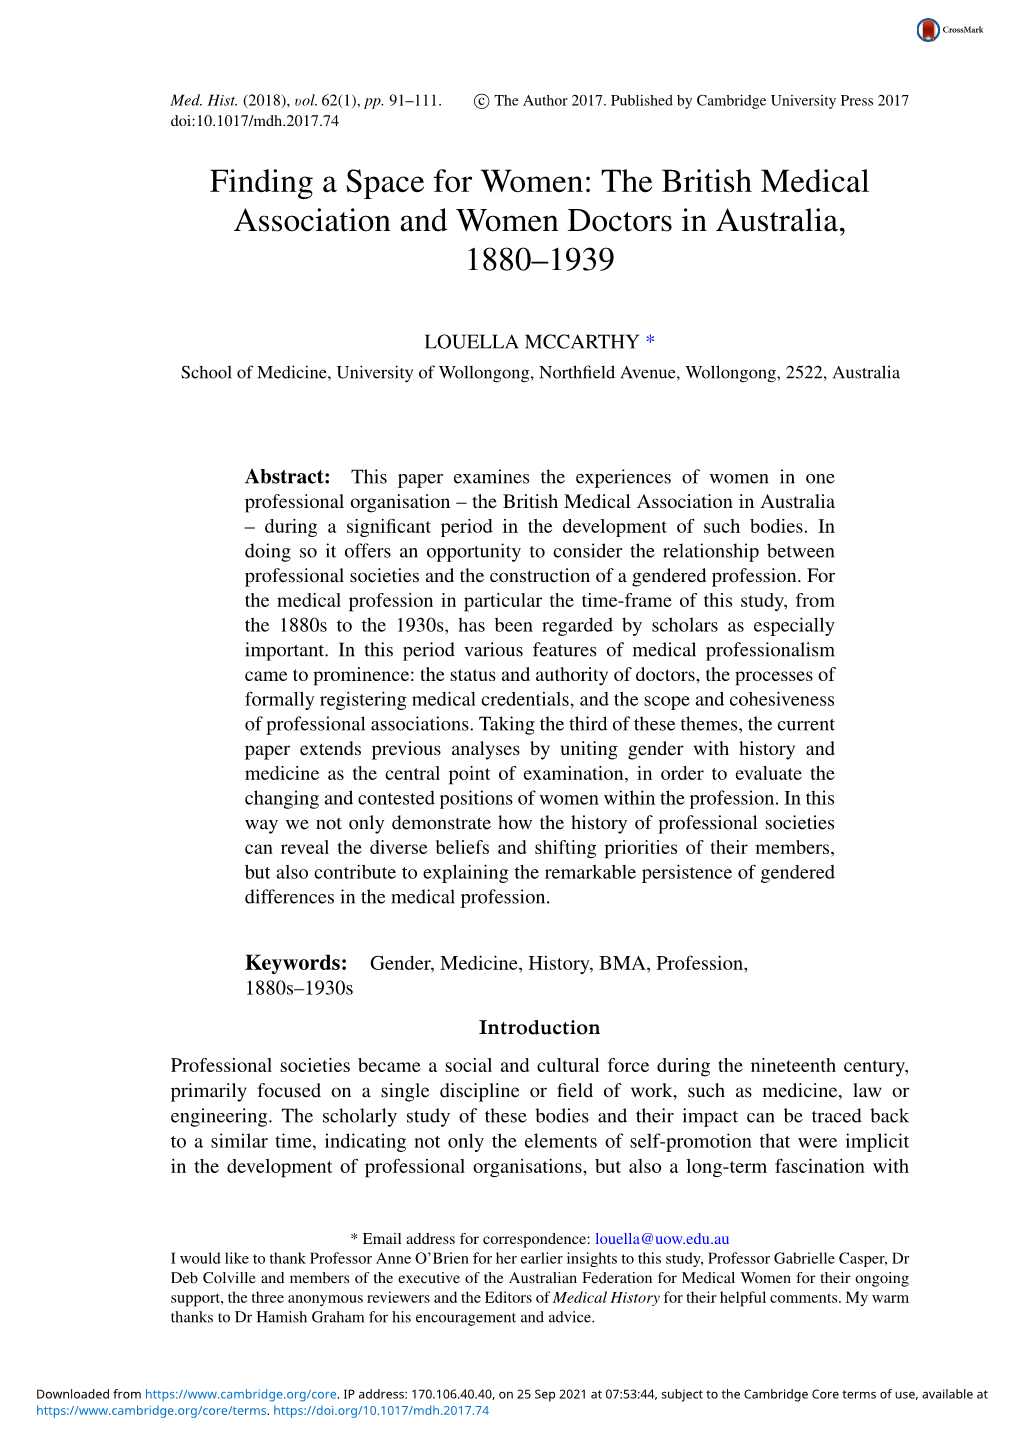 The British Medical Association and Women Doctors in Australia, 1880–1939